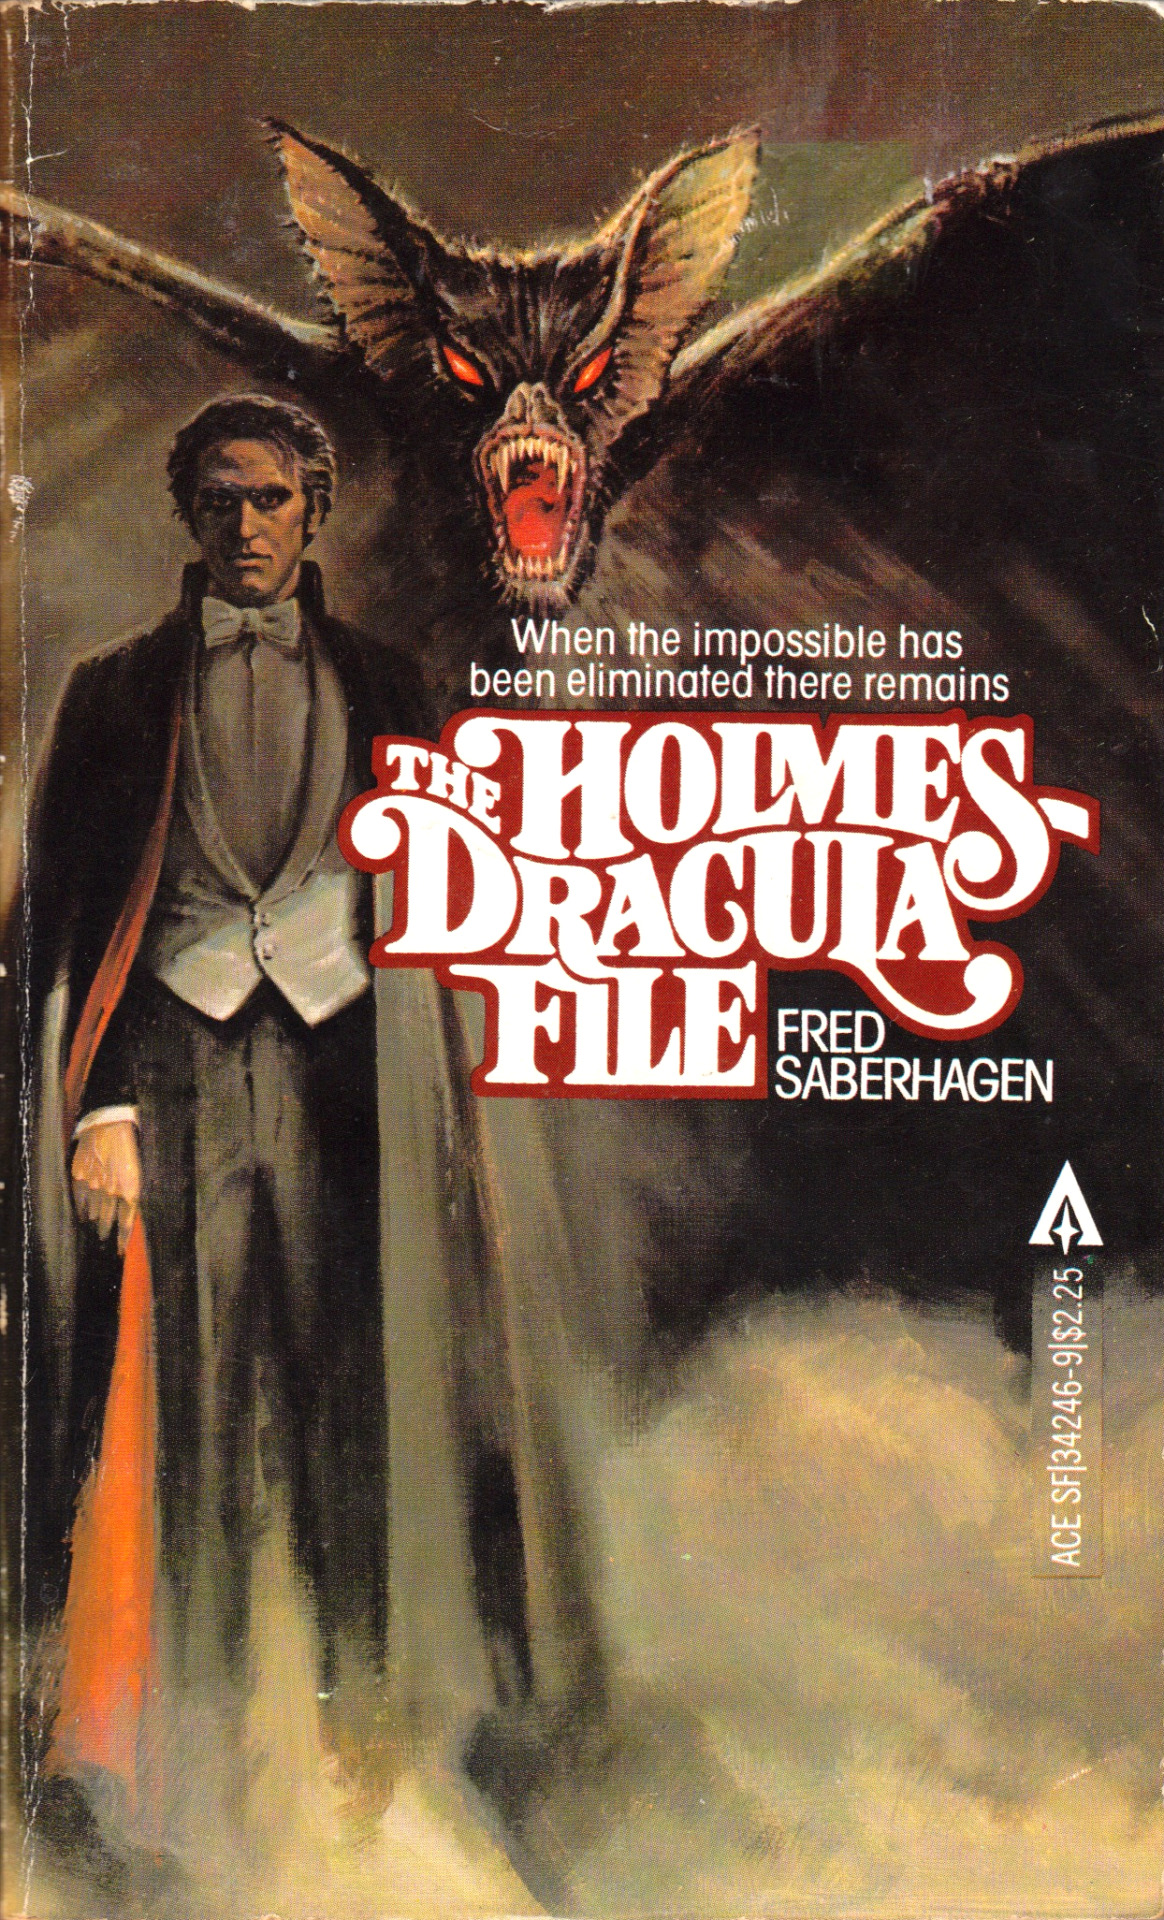 The Holmes-Dracula File, by  Fred Saberhagen (Ace Books, 1978) From a second-hand